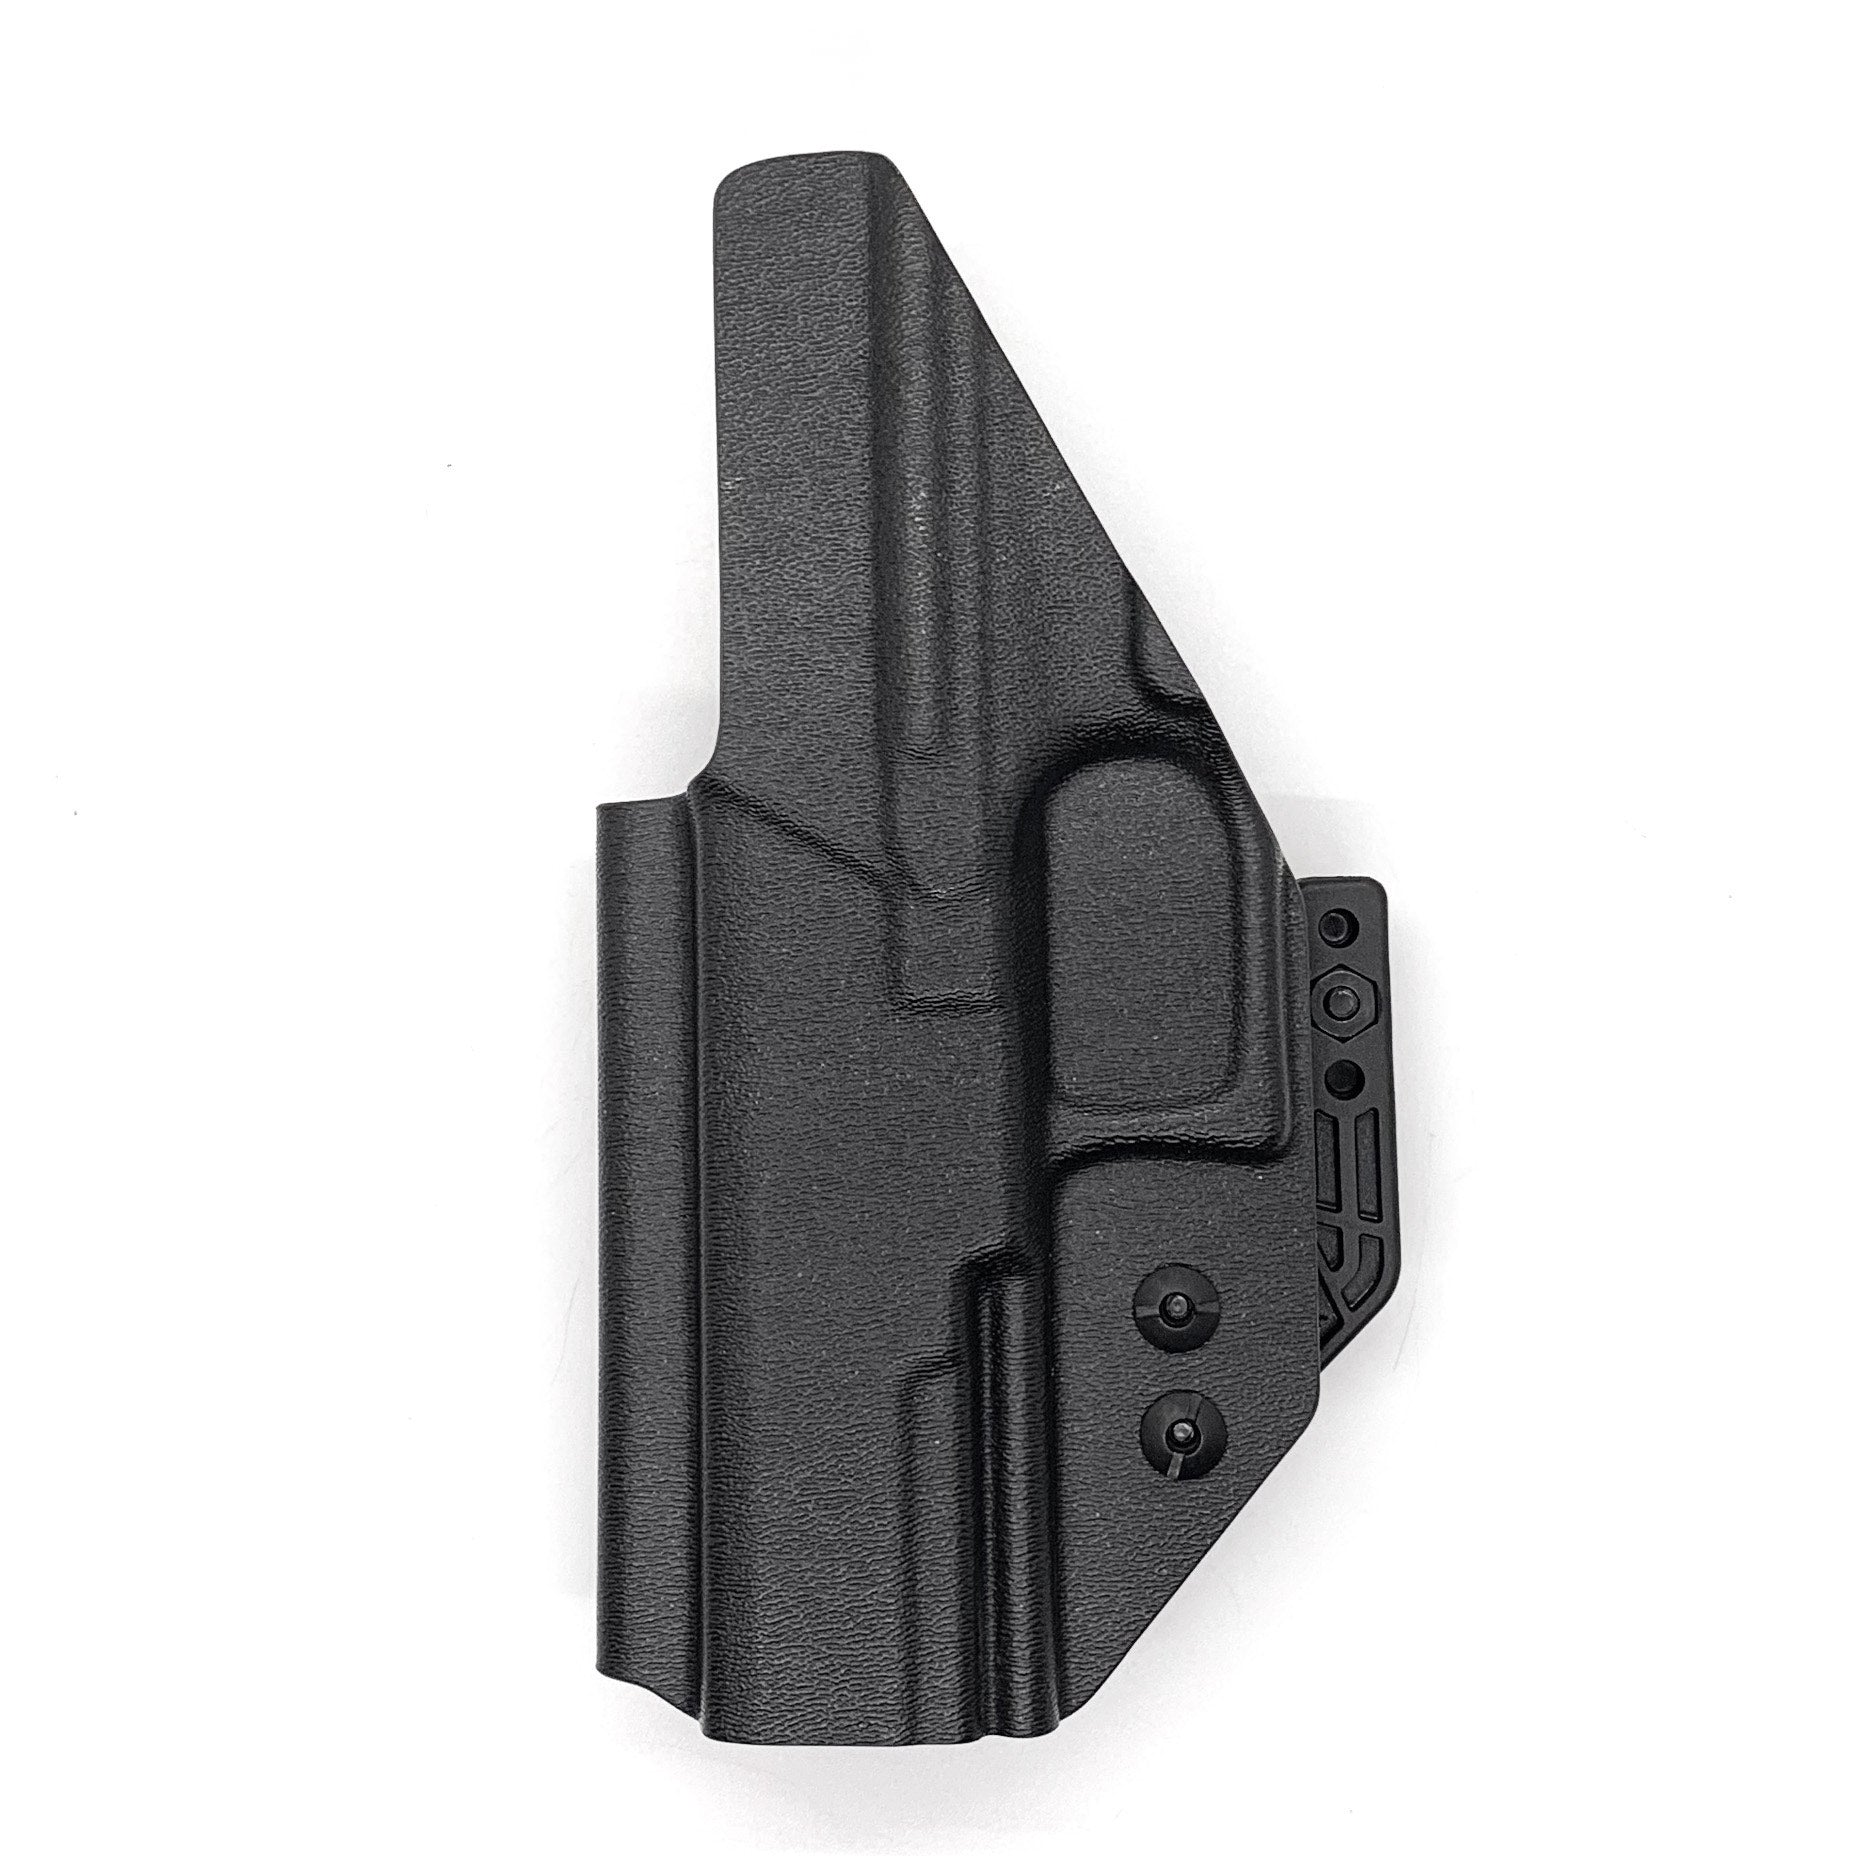 Inside Waistband IWB Holster designed to fit the Walther PDP Full Size 4" pistol. Holster profile is cut to allow red dot sights to be mounted on the pistol.  This holster will fit the Full Size 4.5", Full Size 4" & Compact. Full sweat guard, adjustable retention and open muzzle for threaded barrels and compensators.